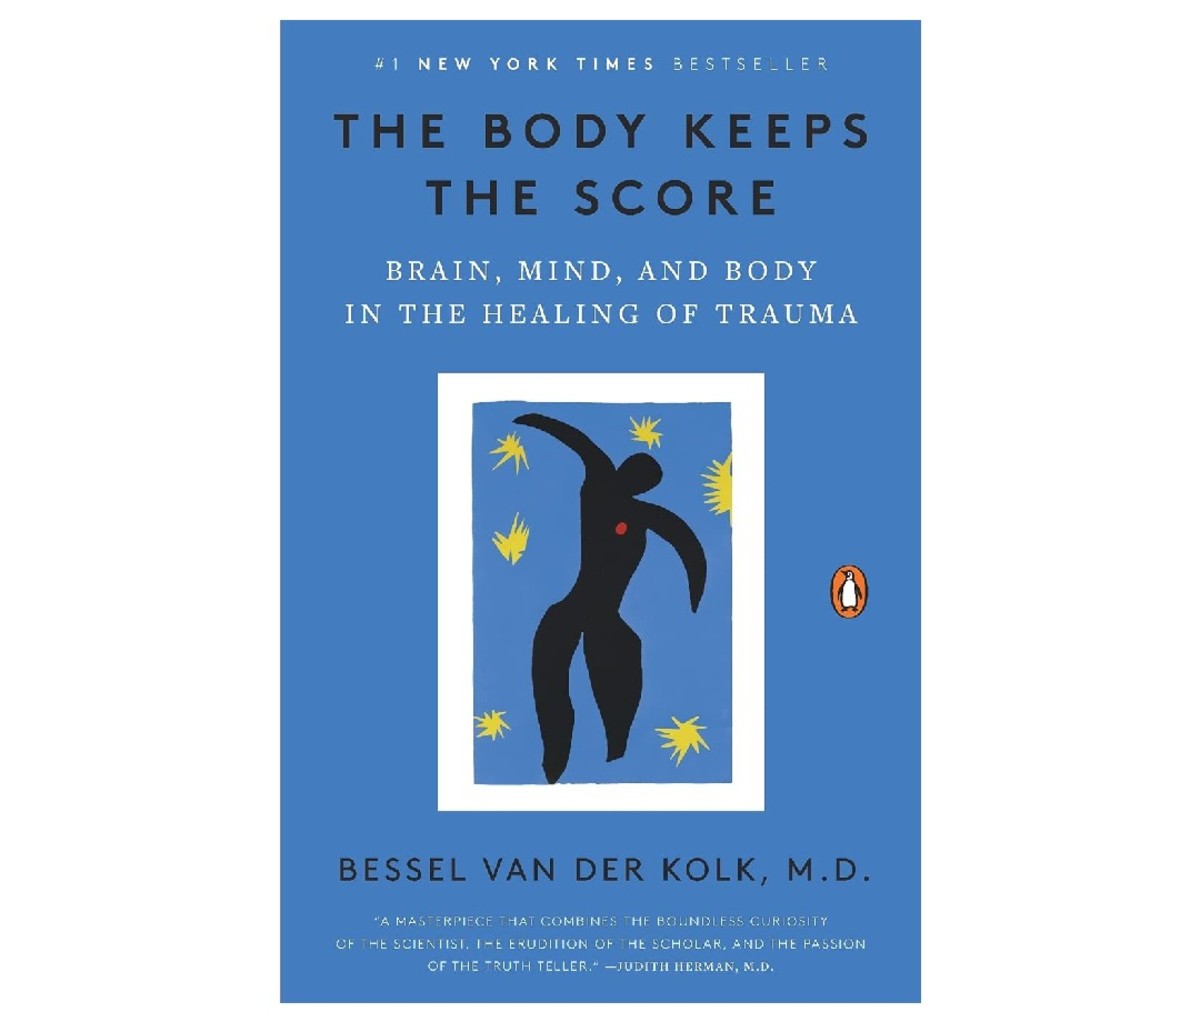 The Body Keeps the Score: Brain, Mind, and Body in the Healing of Trauma by Bessel van der Kolk, MD